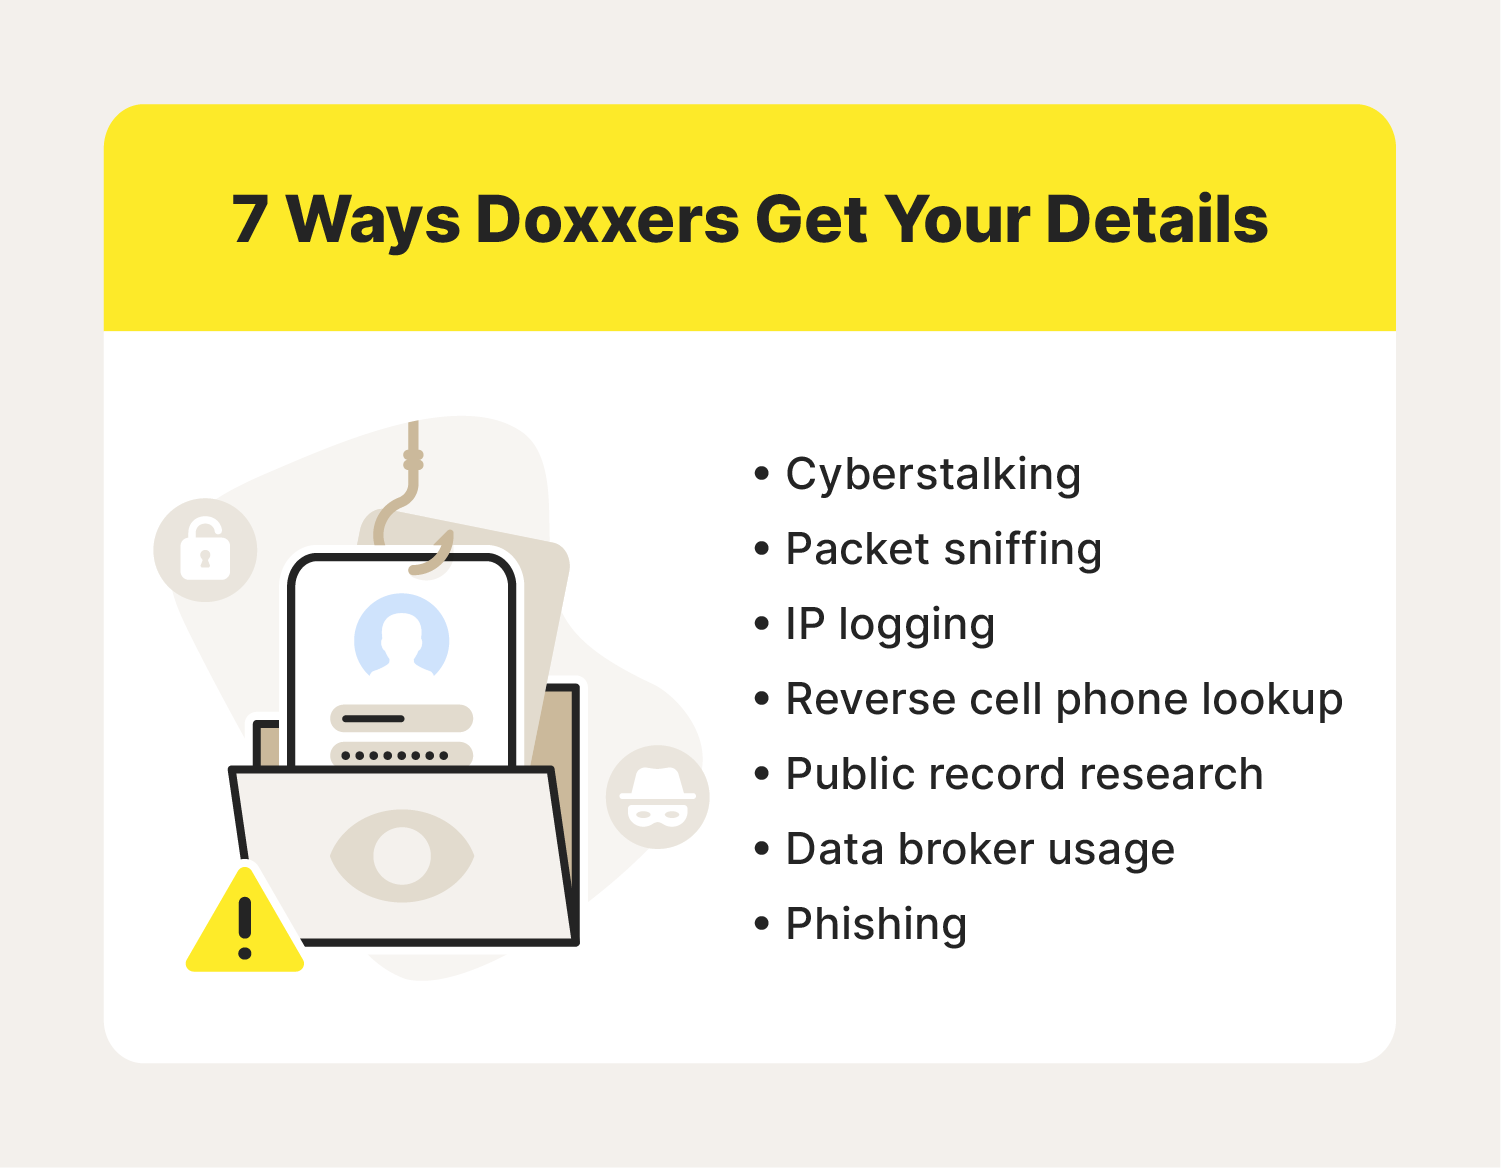 An image explaining that doxxers sometimes resort to tactics like cyberstalking, packet sniffing, IP logging, reverse cell phone lookup, public record searches, data broker usage, and phishing to learn private details about targets.